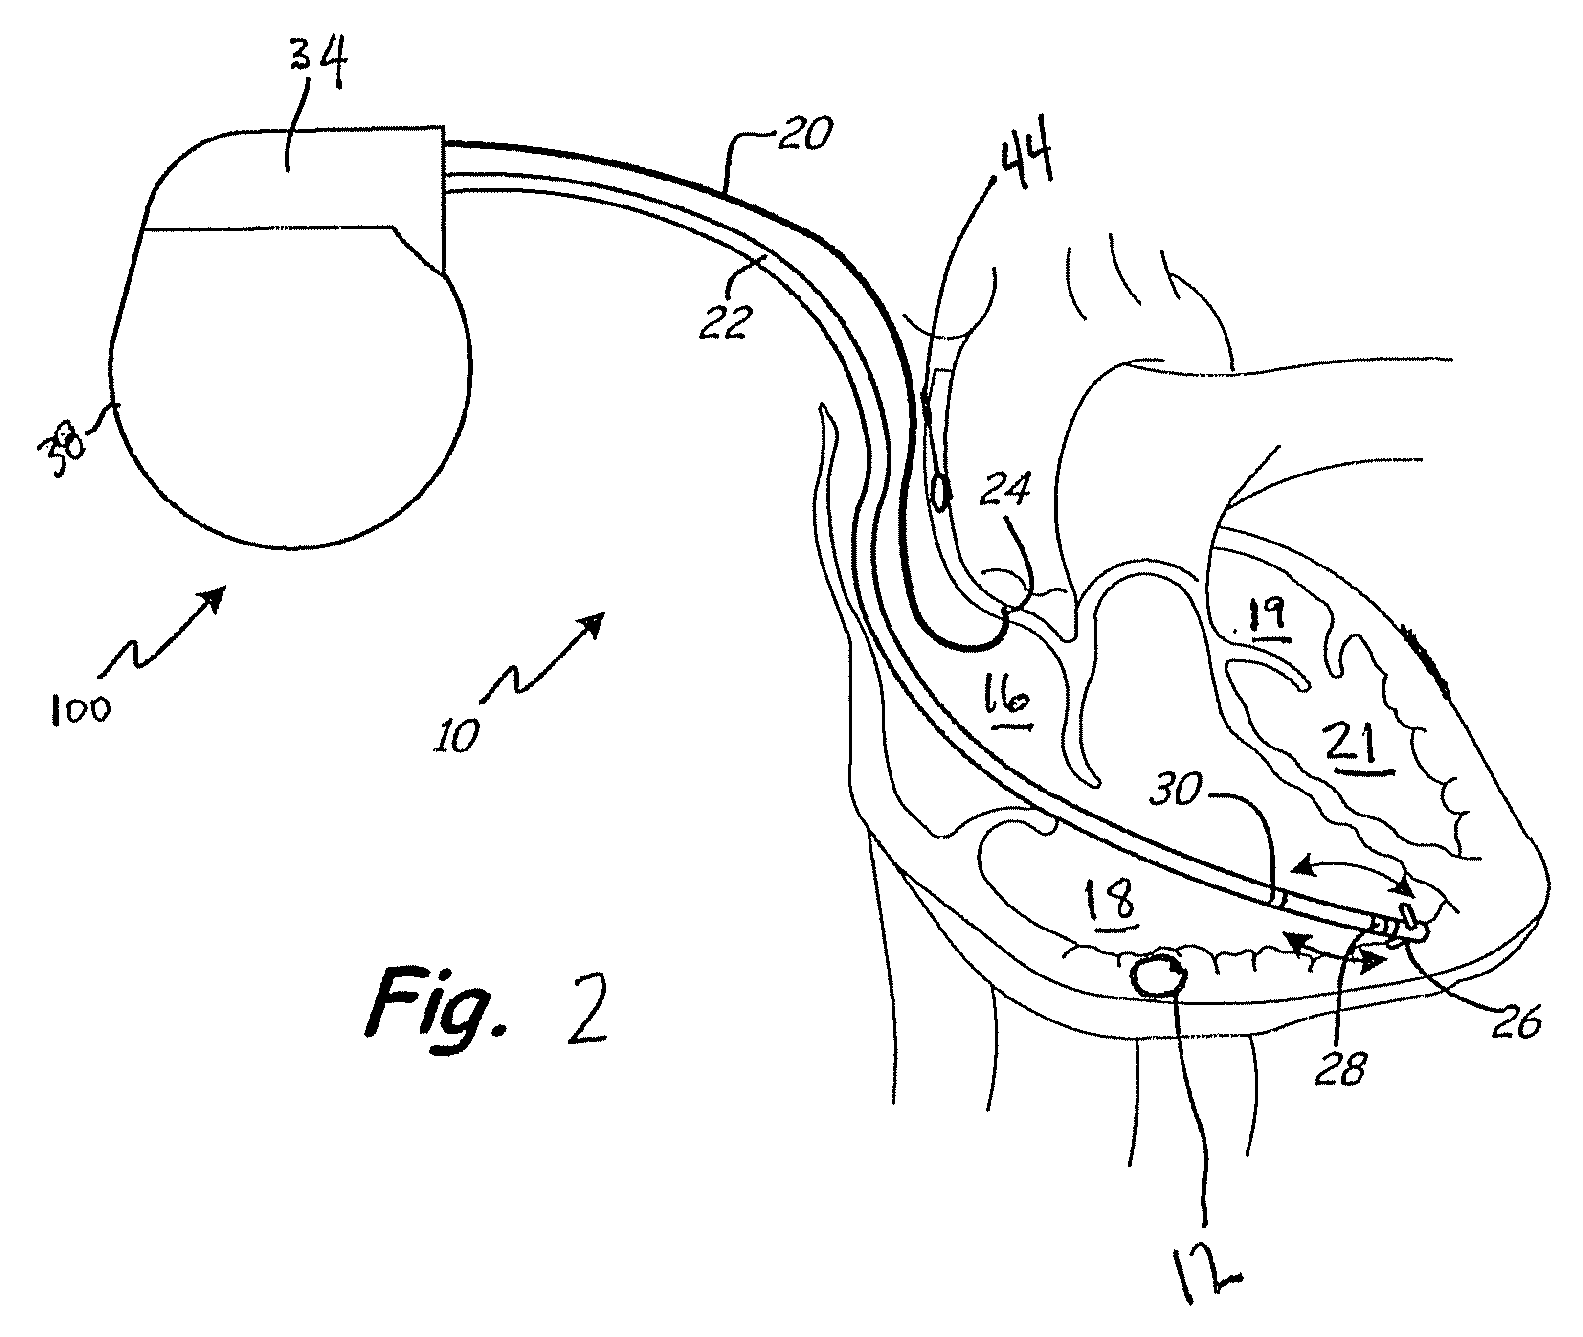 Electronic and biological pacemaker systems